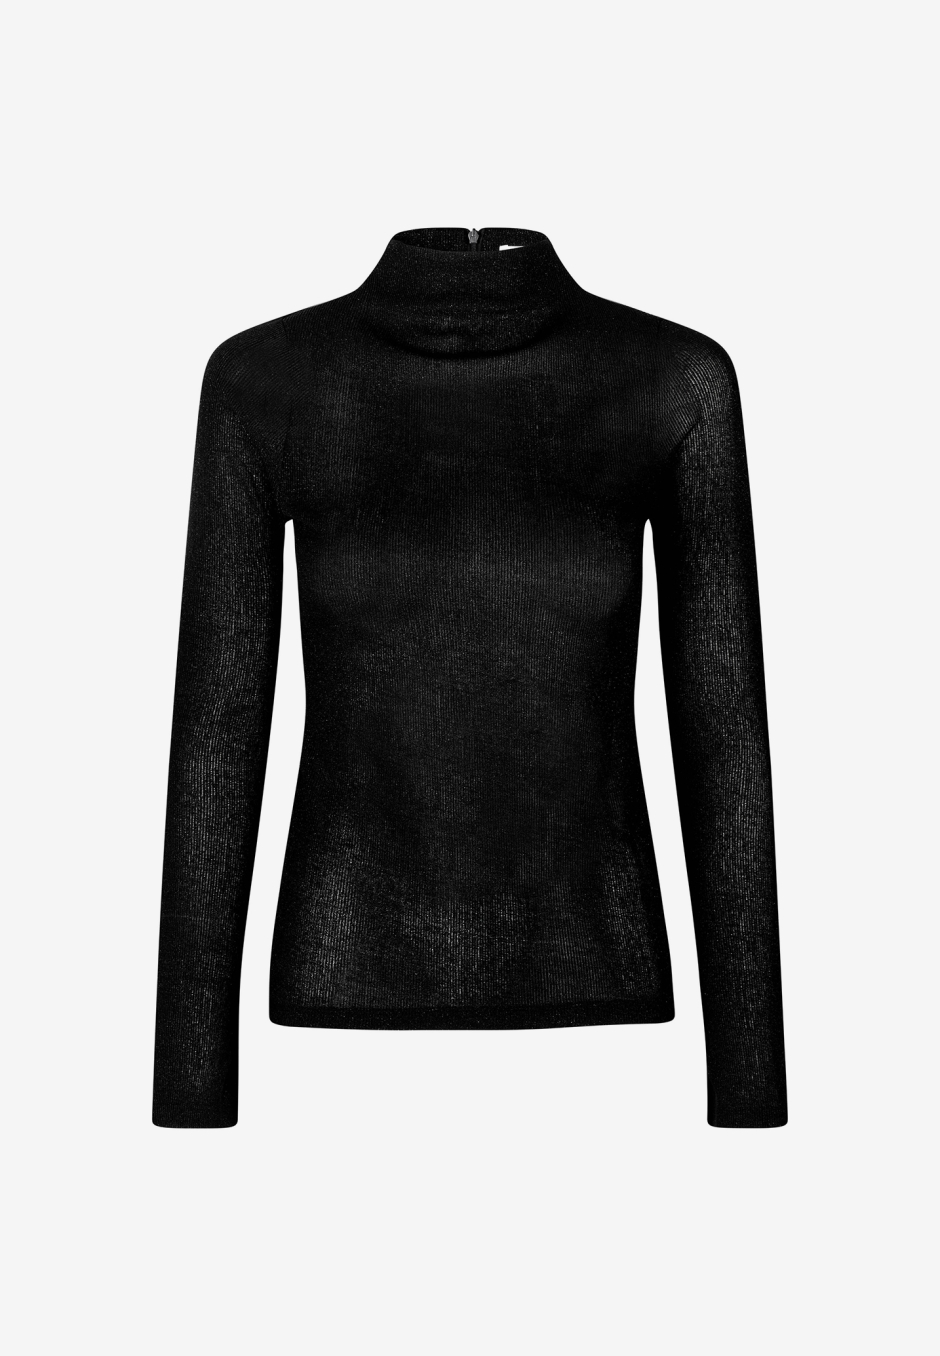 Oval Square Glam Turtle Neck Top